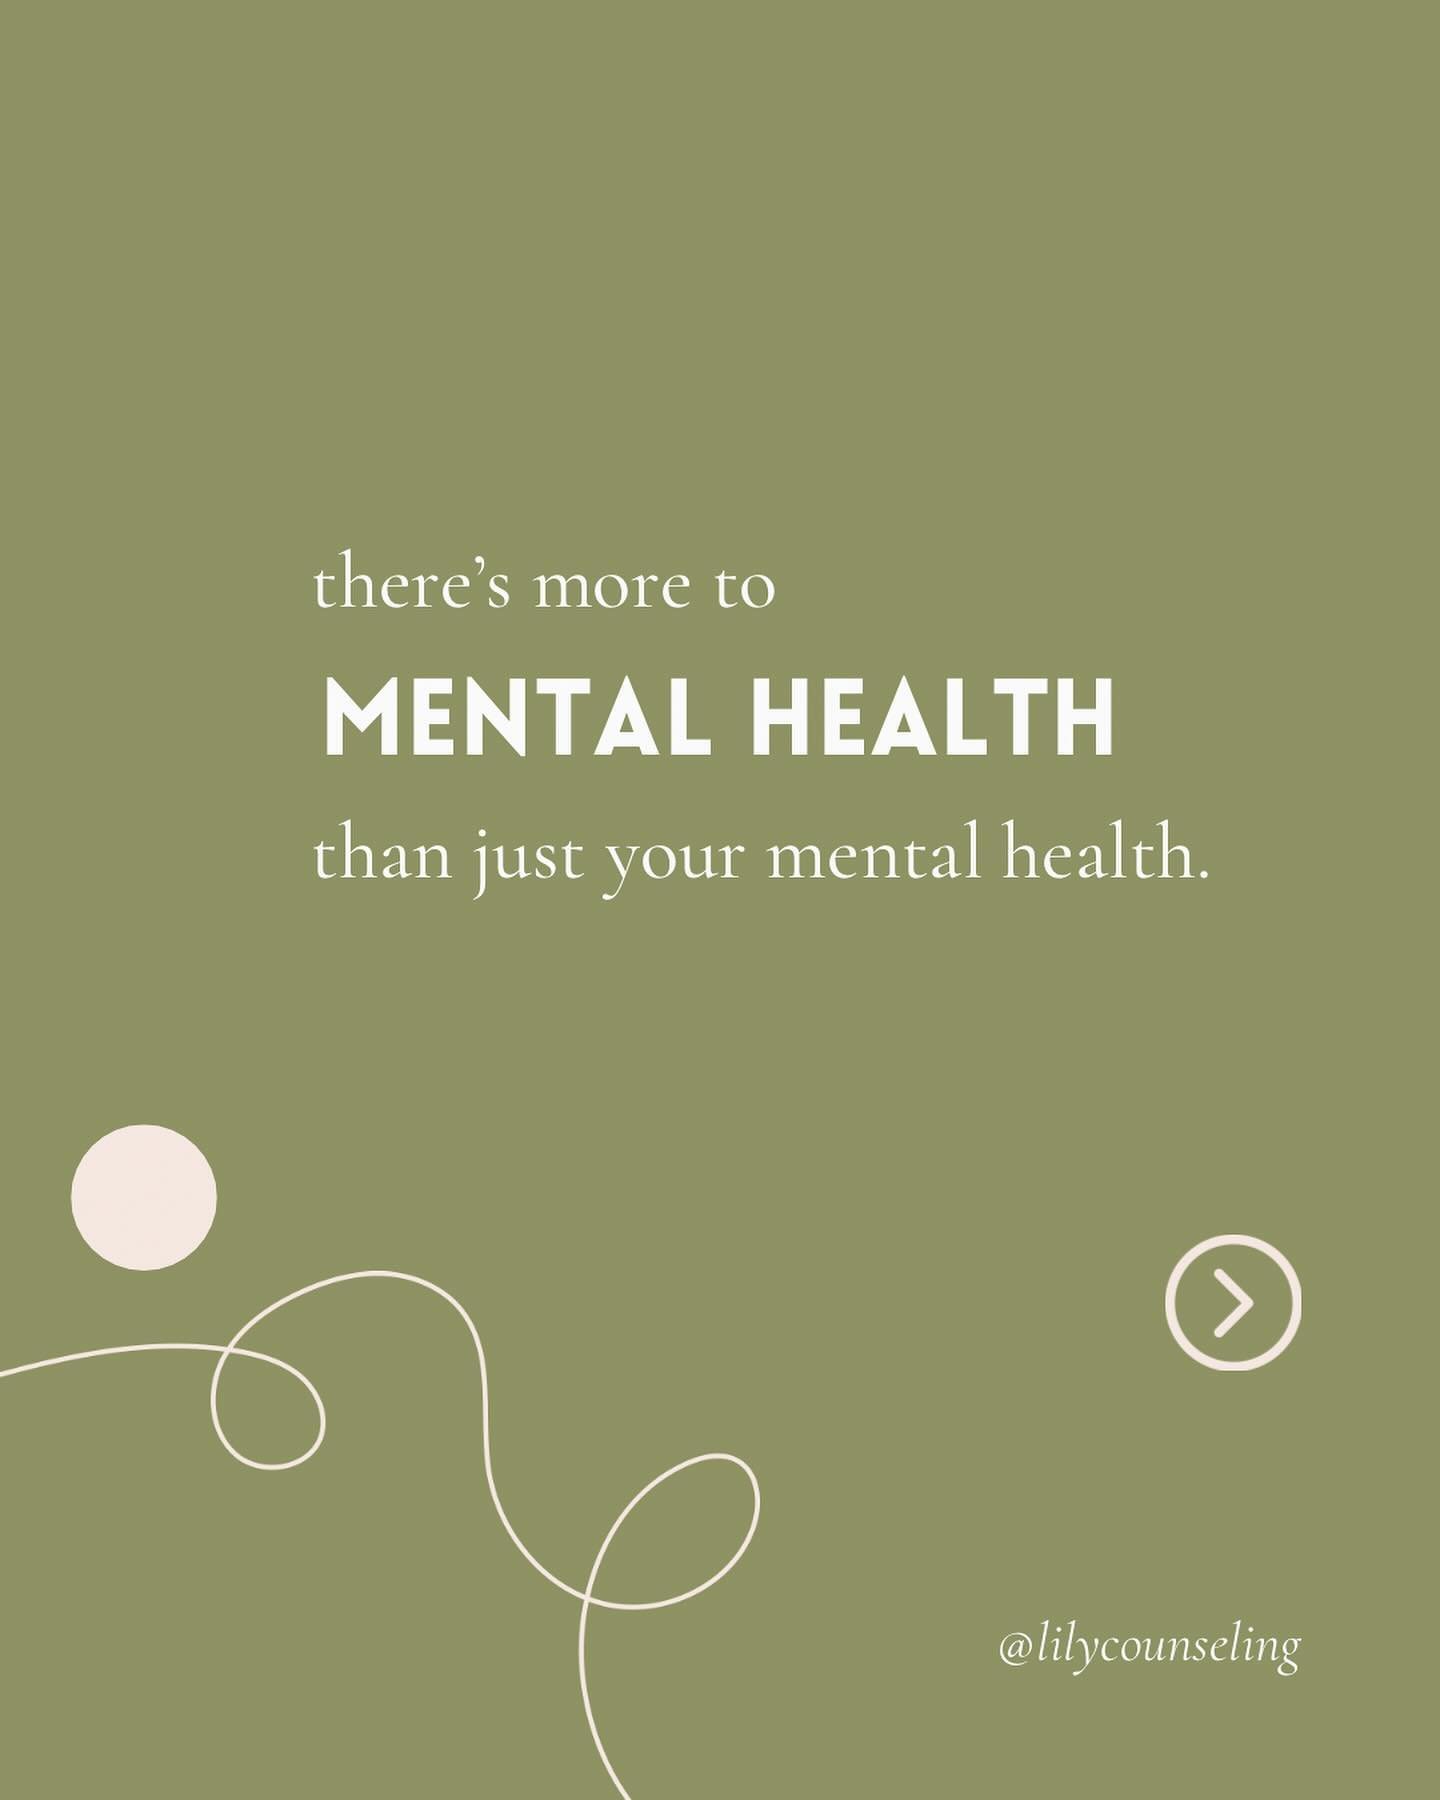 Here&rsquo;s the &ldquo;May is Mental Health Month&rdquo; post you REALLY need. 

🤍 Every year we ~raise awareness~ about mental health in May, but these days the awareness is shoved down our throats every single day in the media, so it doesn&rsquo;